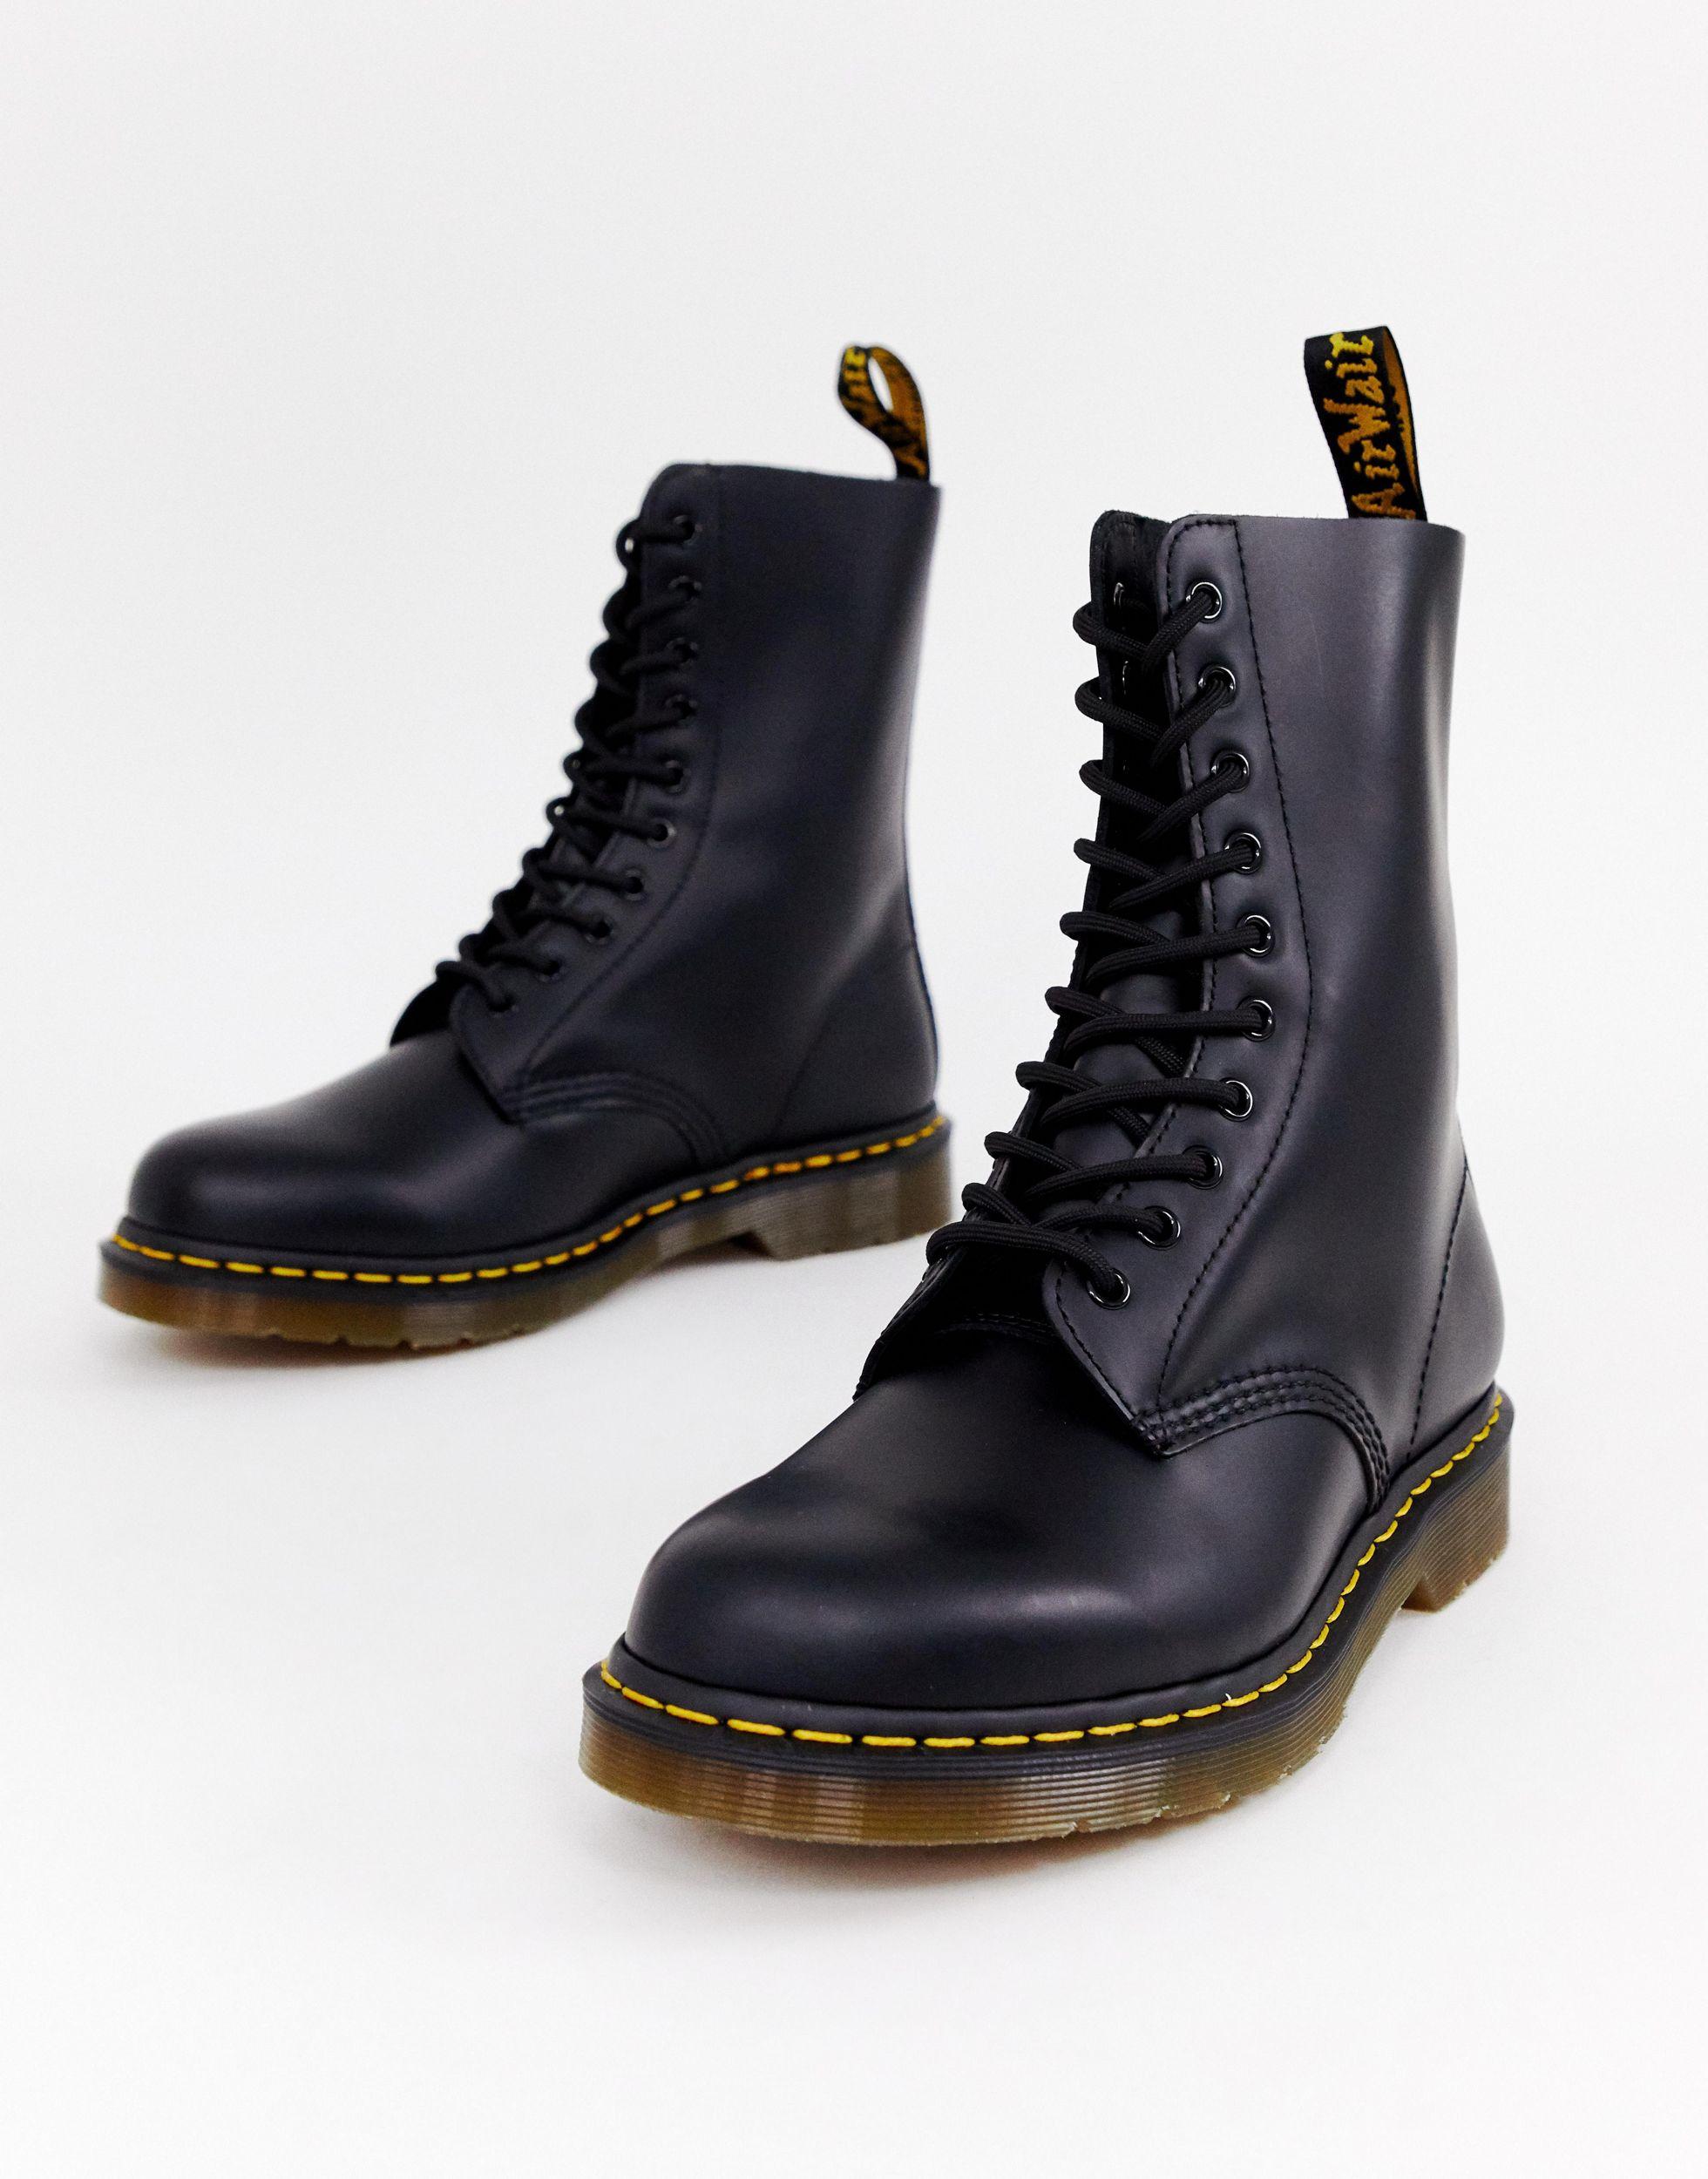 Dr. Martens Leather 1490 10-eye Boot in Black for Men - Save 82% - Lyst